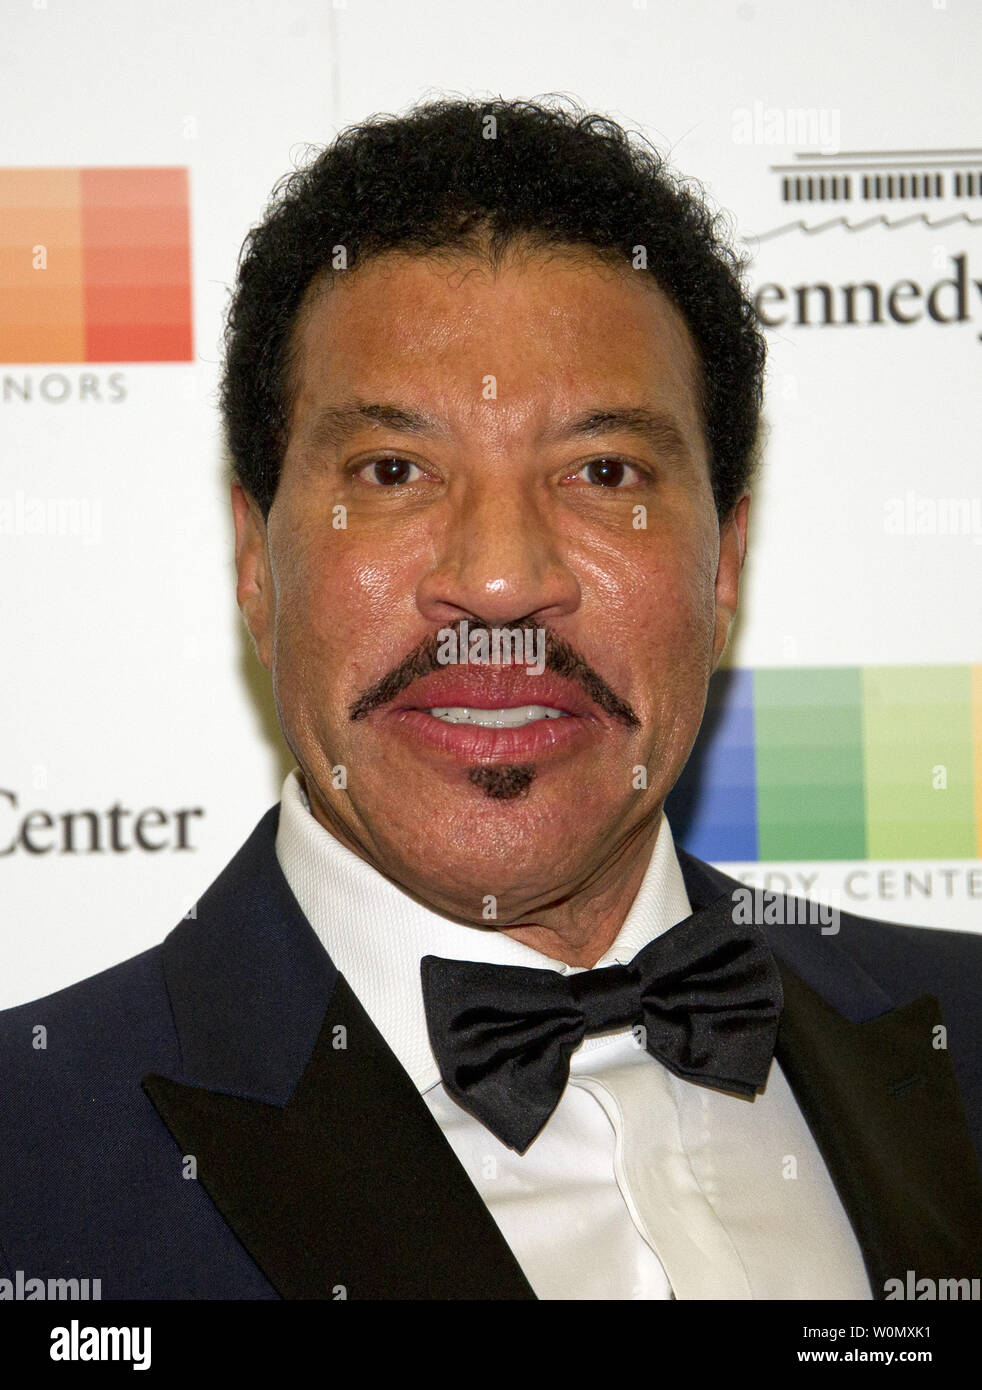 Lionel Richie arrives for the formal Artist's Dinner honoring the recipients of the 40th Annual Kennedy Center Honors hosted by United States Secretary of State Rex Tillerson at the US Department of State in Washington, D.C. on Saturday, December 2, 2017. The 2017 honorees are: American dancer and choreographer Carmen de Lavallade; Cuban American singer-songwriter and actress Gloria Estefan; American hip hop artist and entertainment icon LL COOL J; American television writer and producer Norman Lear; and American musician and record producer Lionel Richie.  Photo by Ron Sachs/UPI Stock Photo